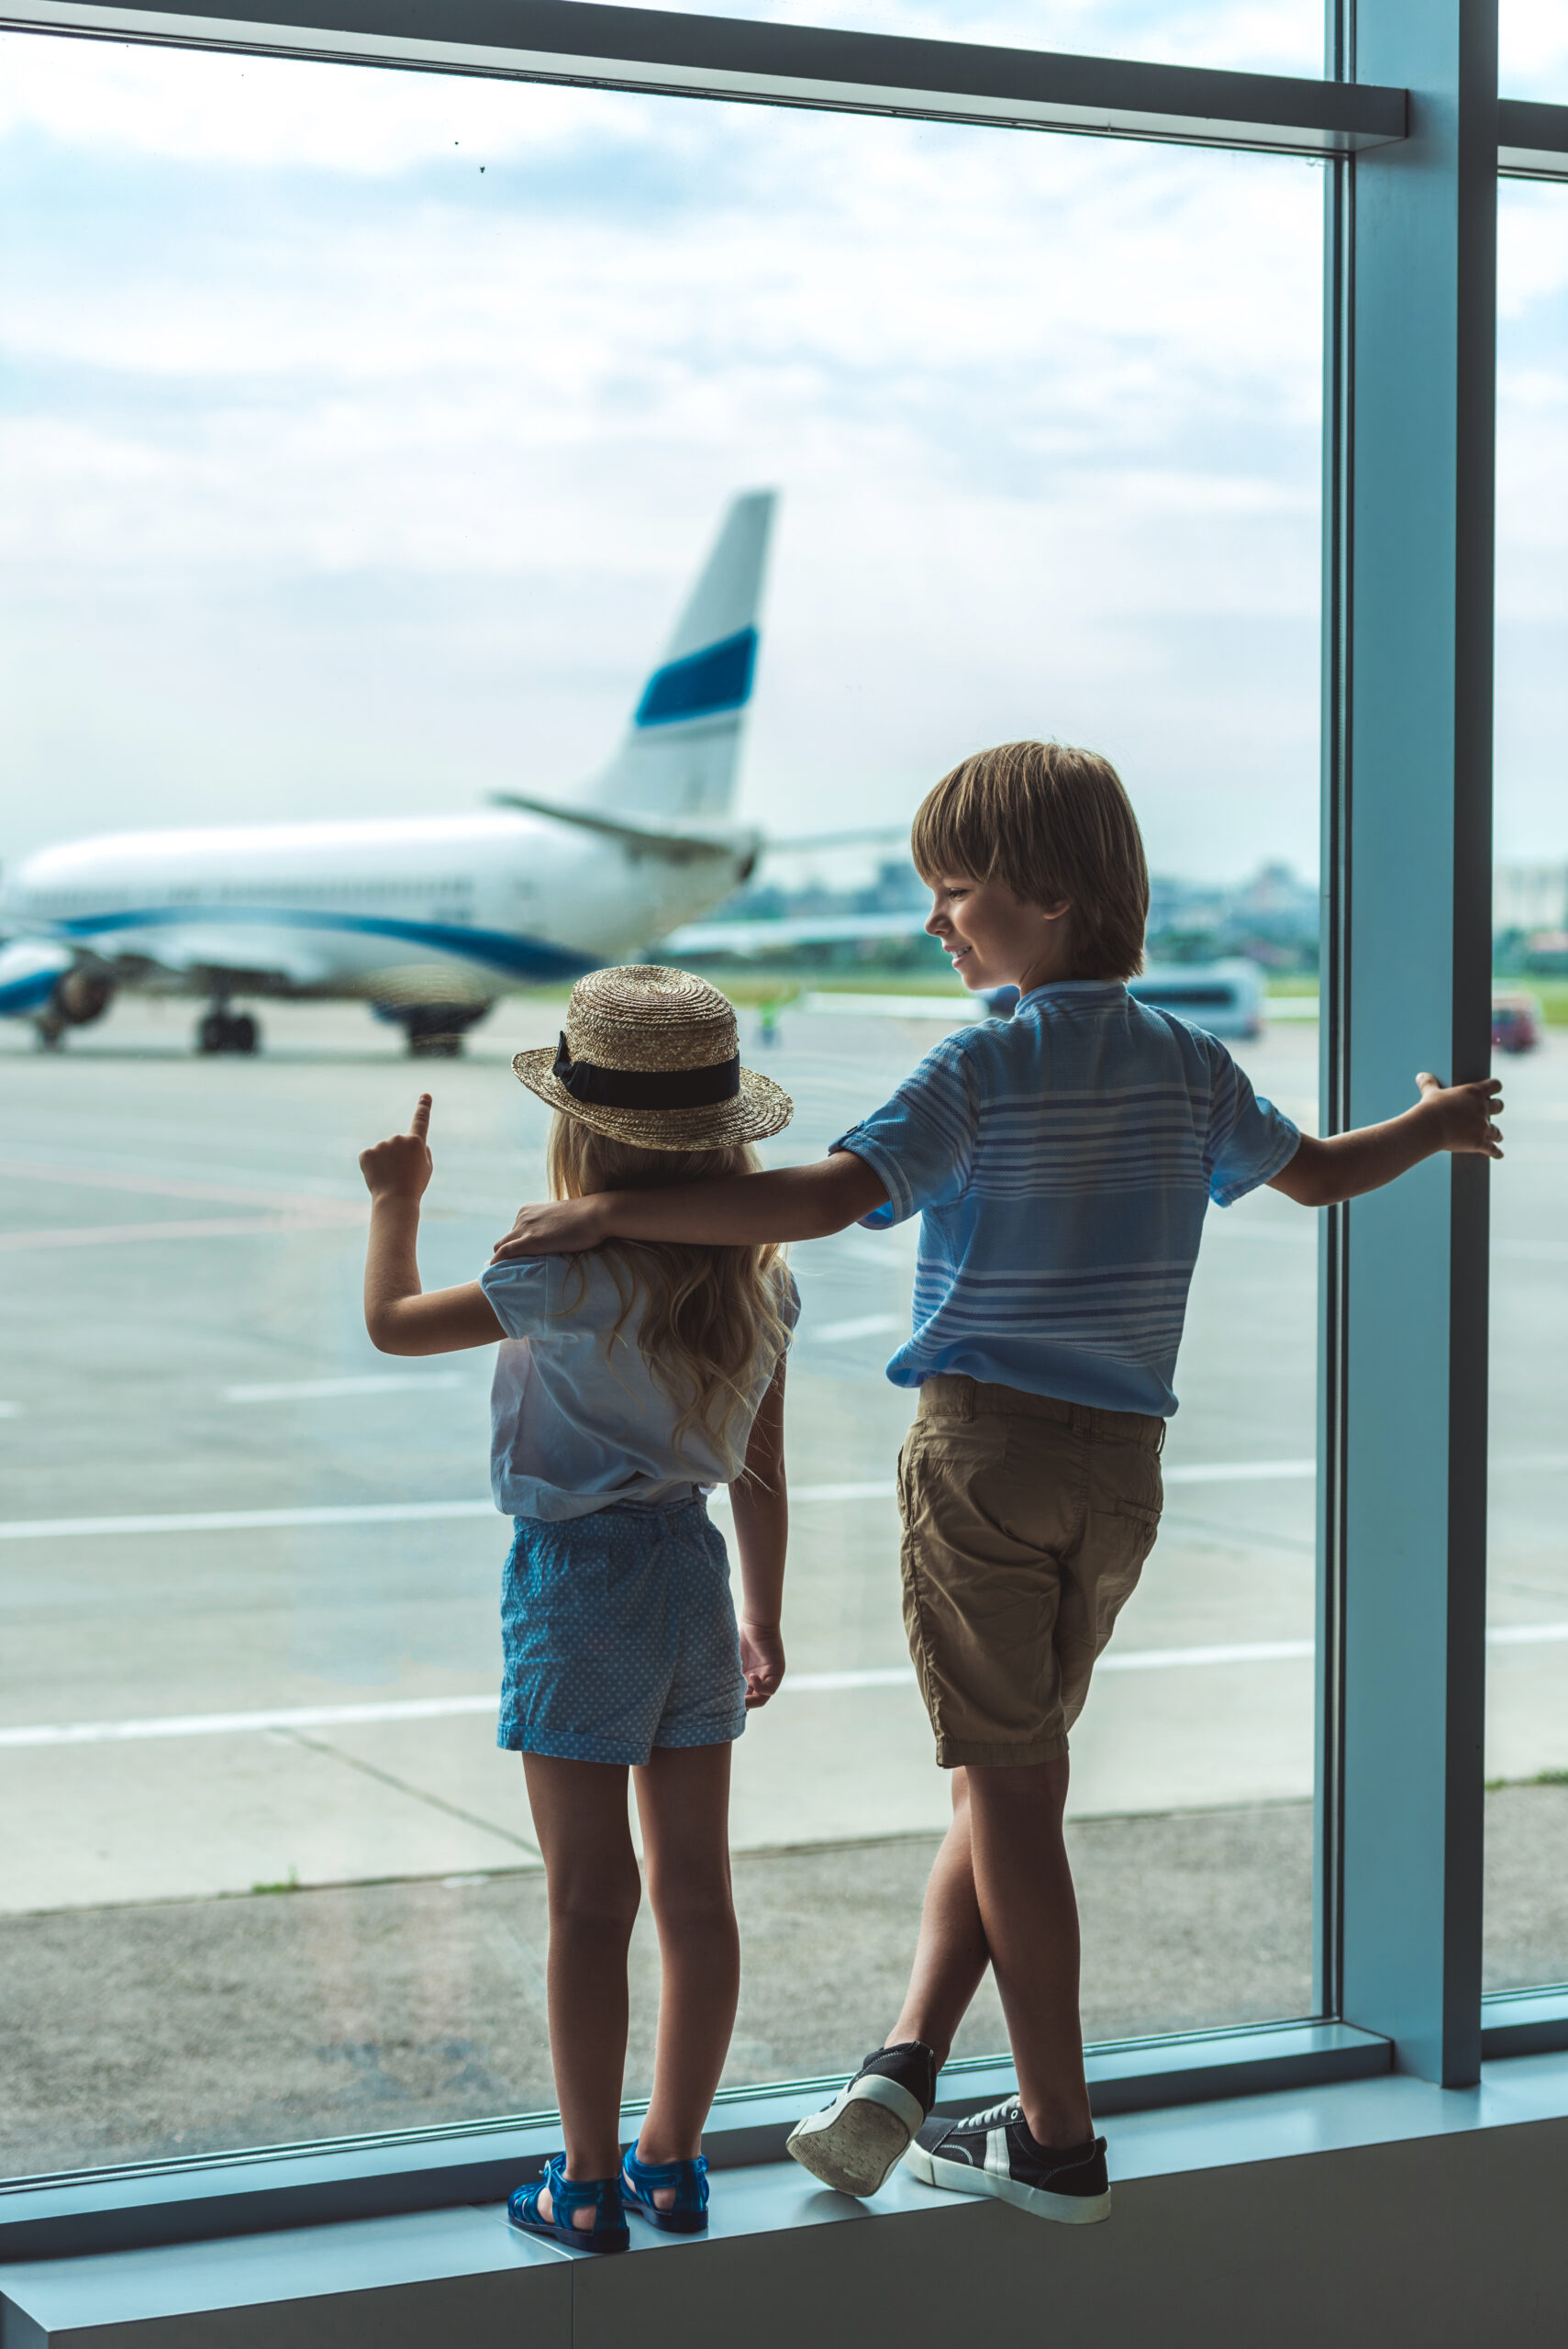 How To Prep Your Child for a Trip With a Family Friend